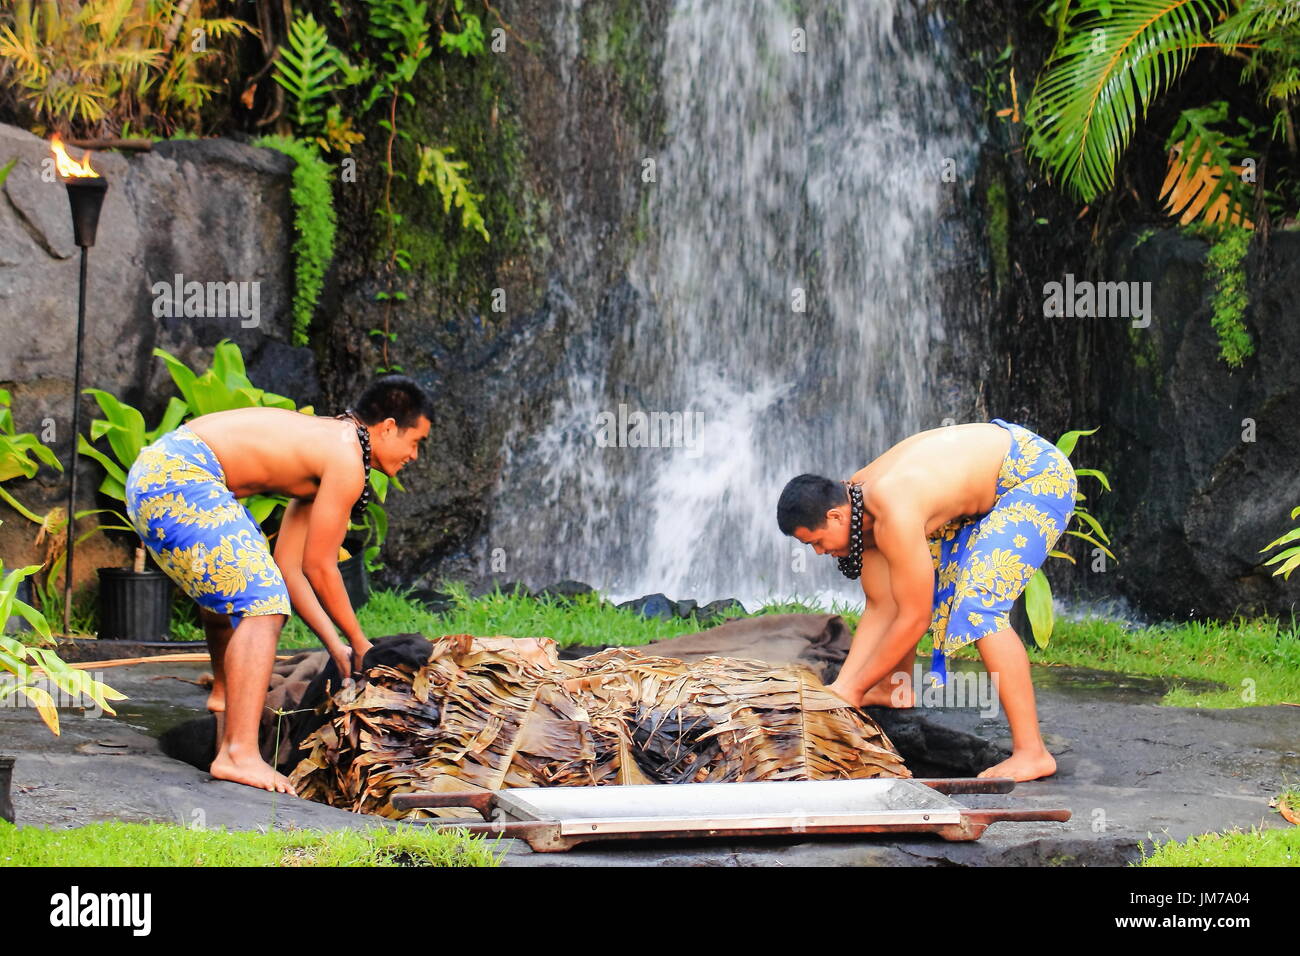 Honolulu, Hawaii - May 27, 2016: Two young Hawaiian men at the Polynesian Cultural Center uplift a pig cooked in the traditional style Kalua utilizing Stock Photo